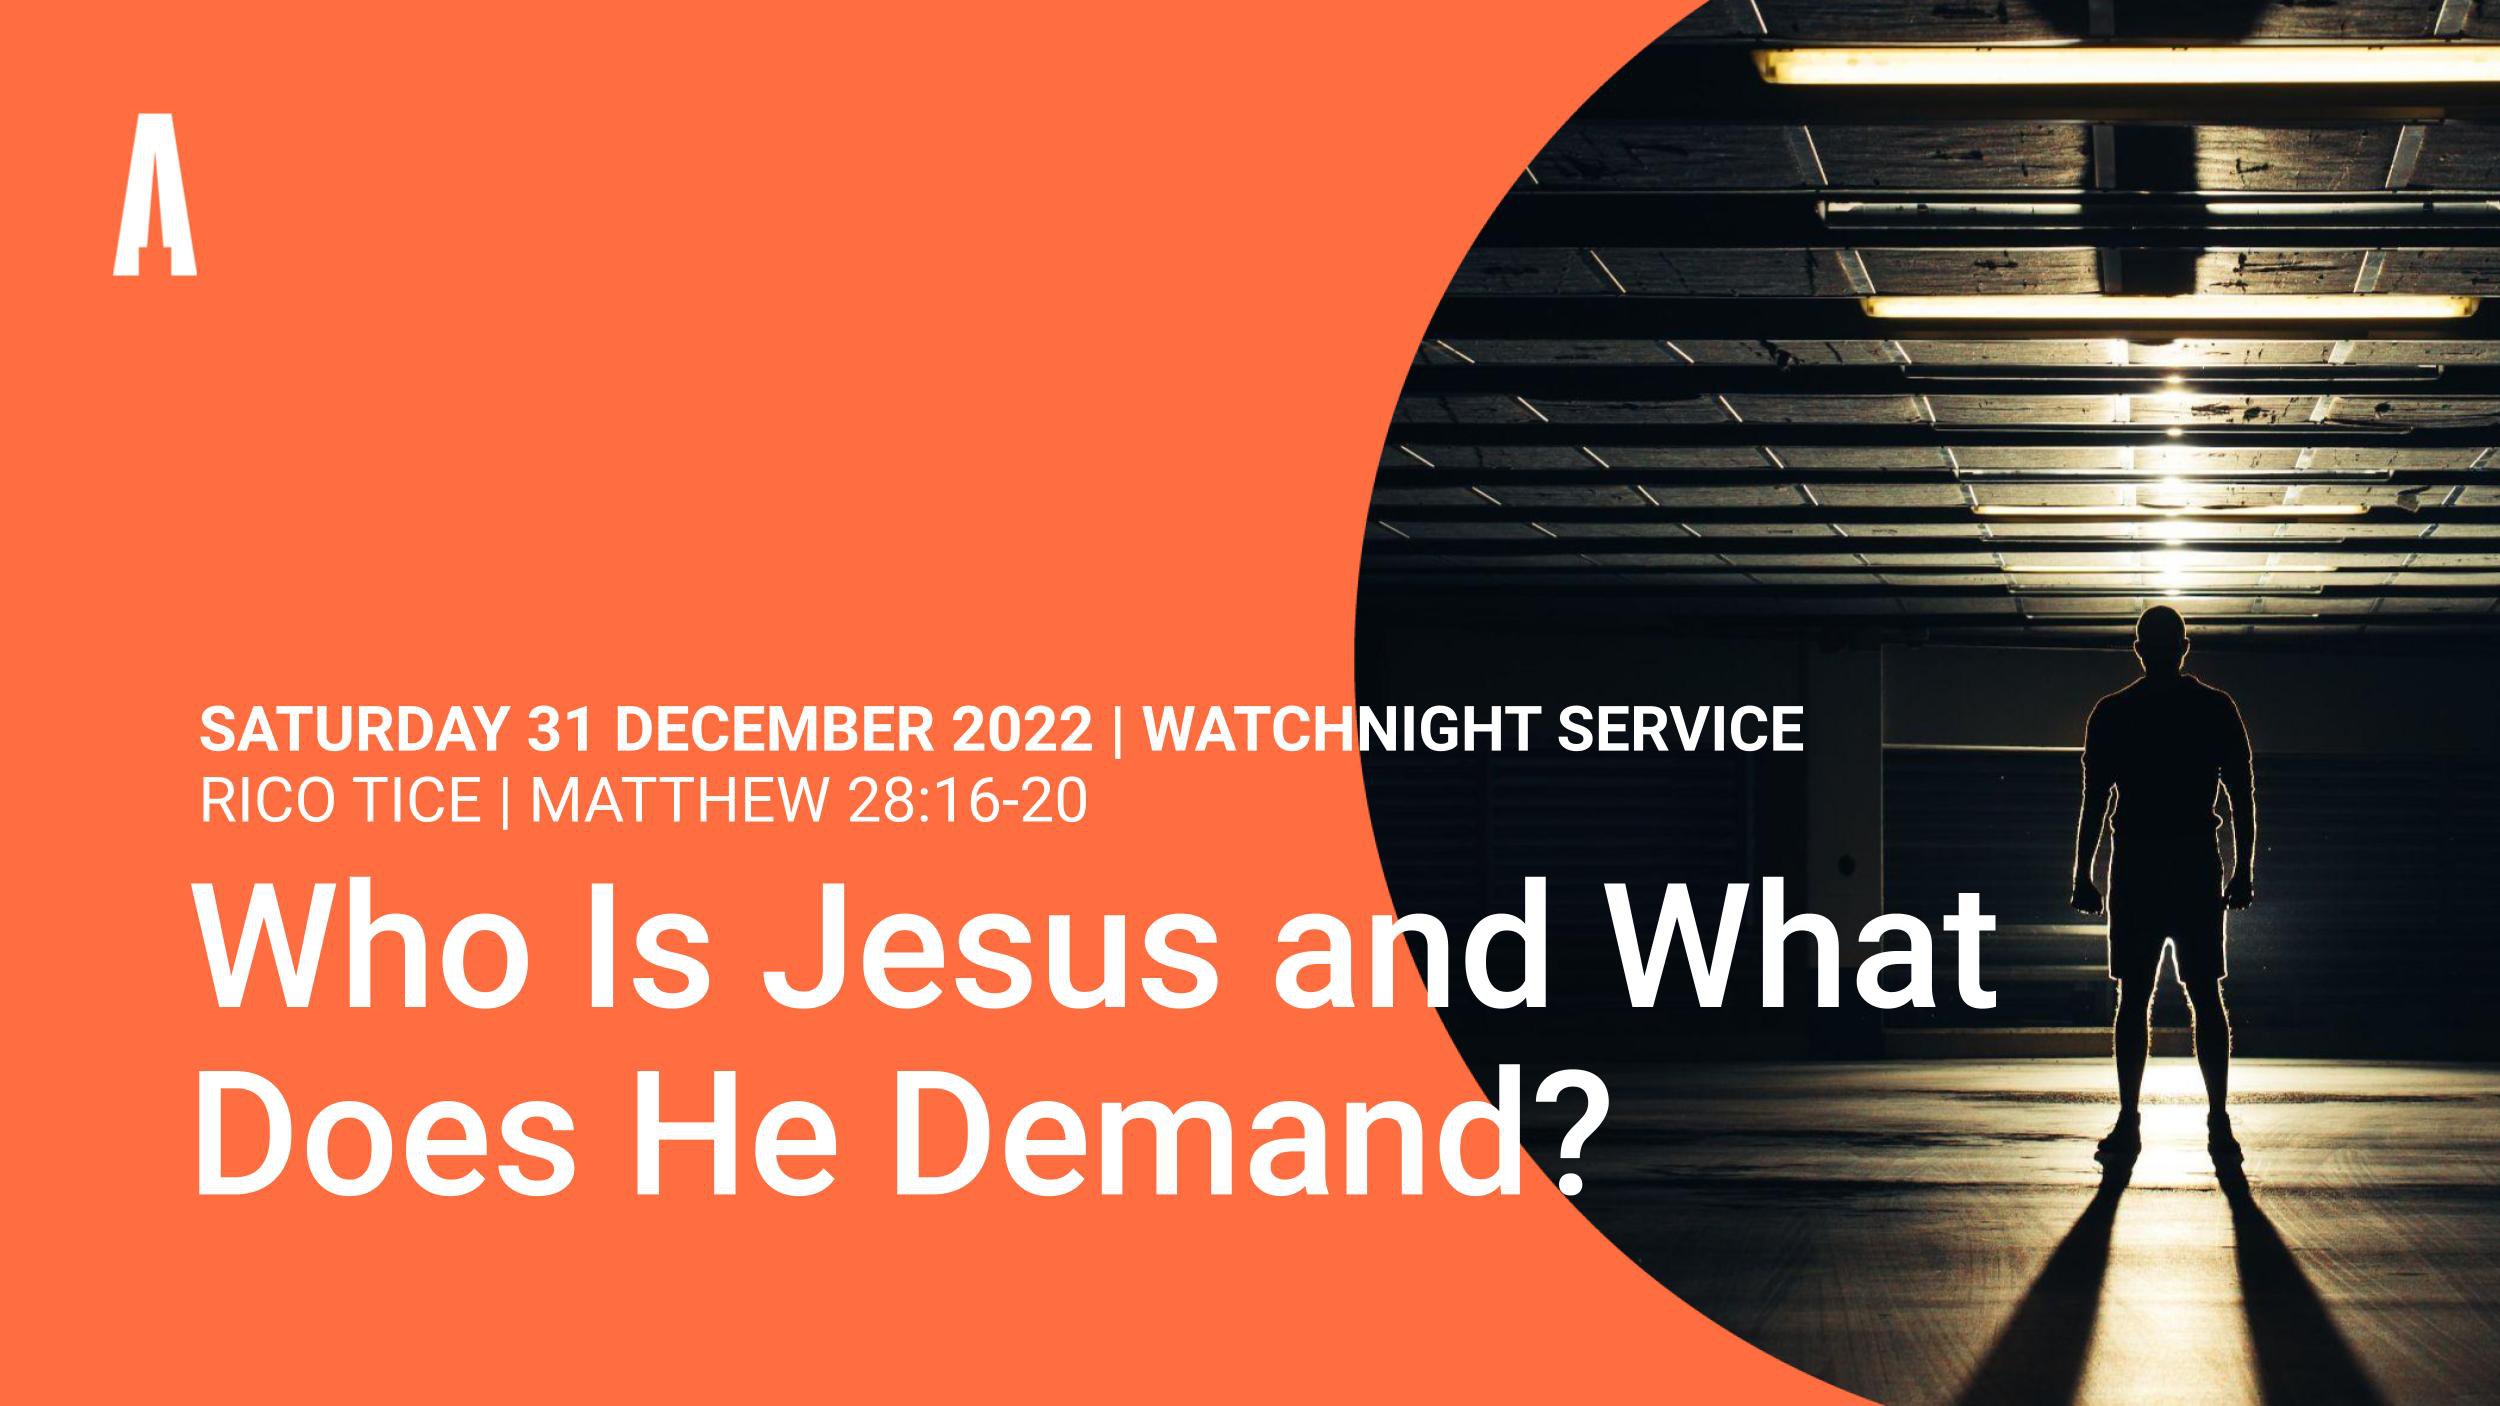 Who Is Jesus and What Does He Demand?